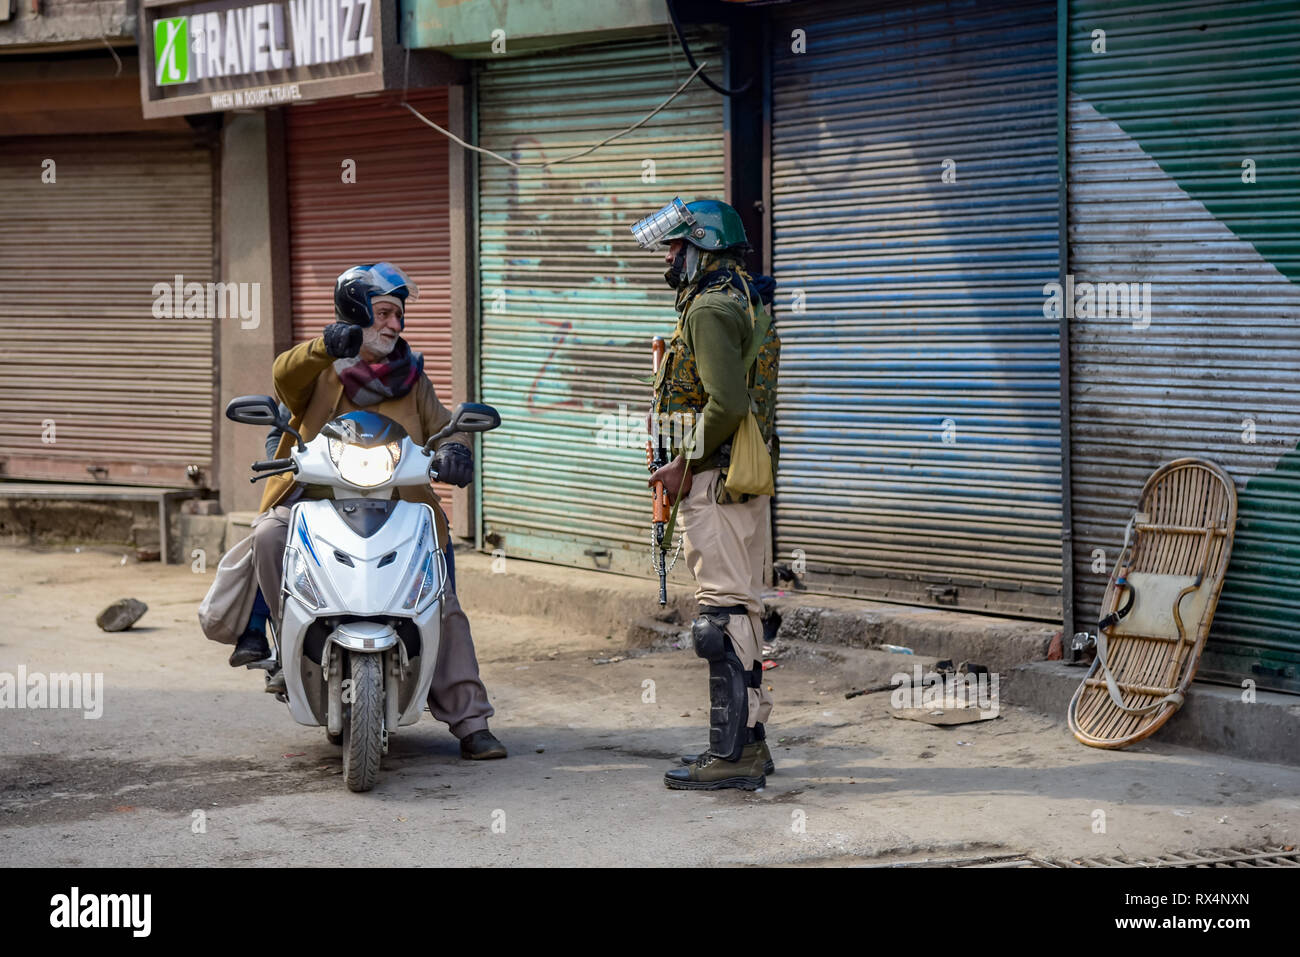 An Indian trooper seen stopping a man on a scooter during restrictions in down town area of Srinagar. Authorities imposed restrictions in parts of Srinagar Kashmir to prevent protest called by Joint Resistance Leadership (JRL) against the detention of Jammu and Kashmir Liberation front chairman Yasin Malik and the arrest of Jamaat-e-Islamia cadres. Stock Photo